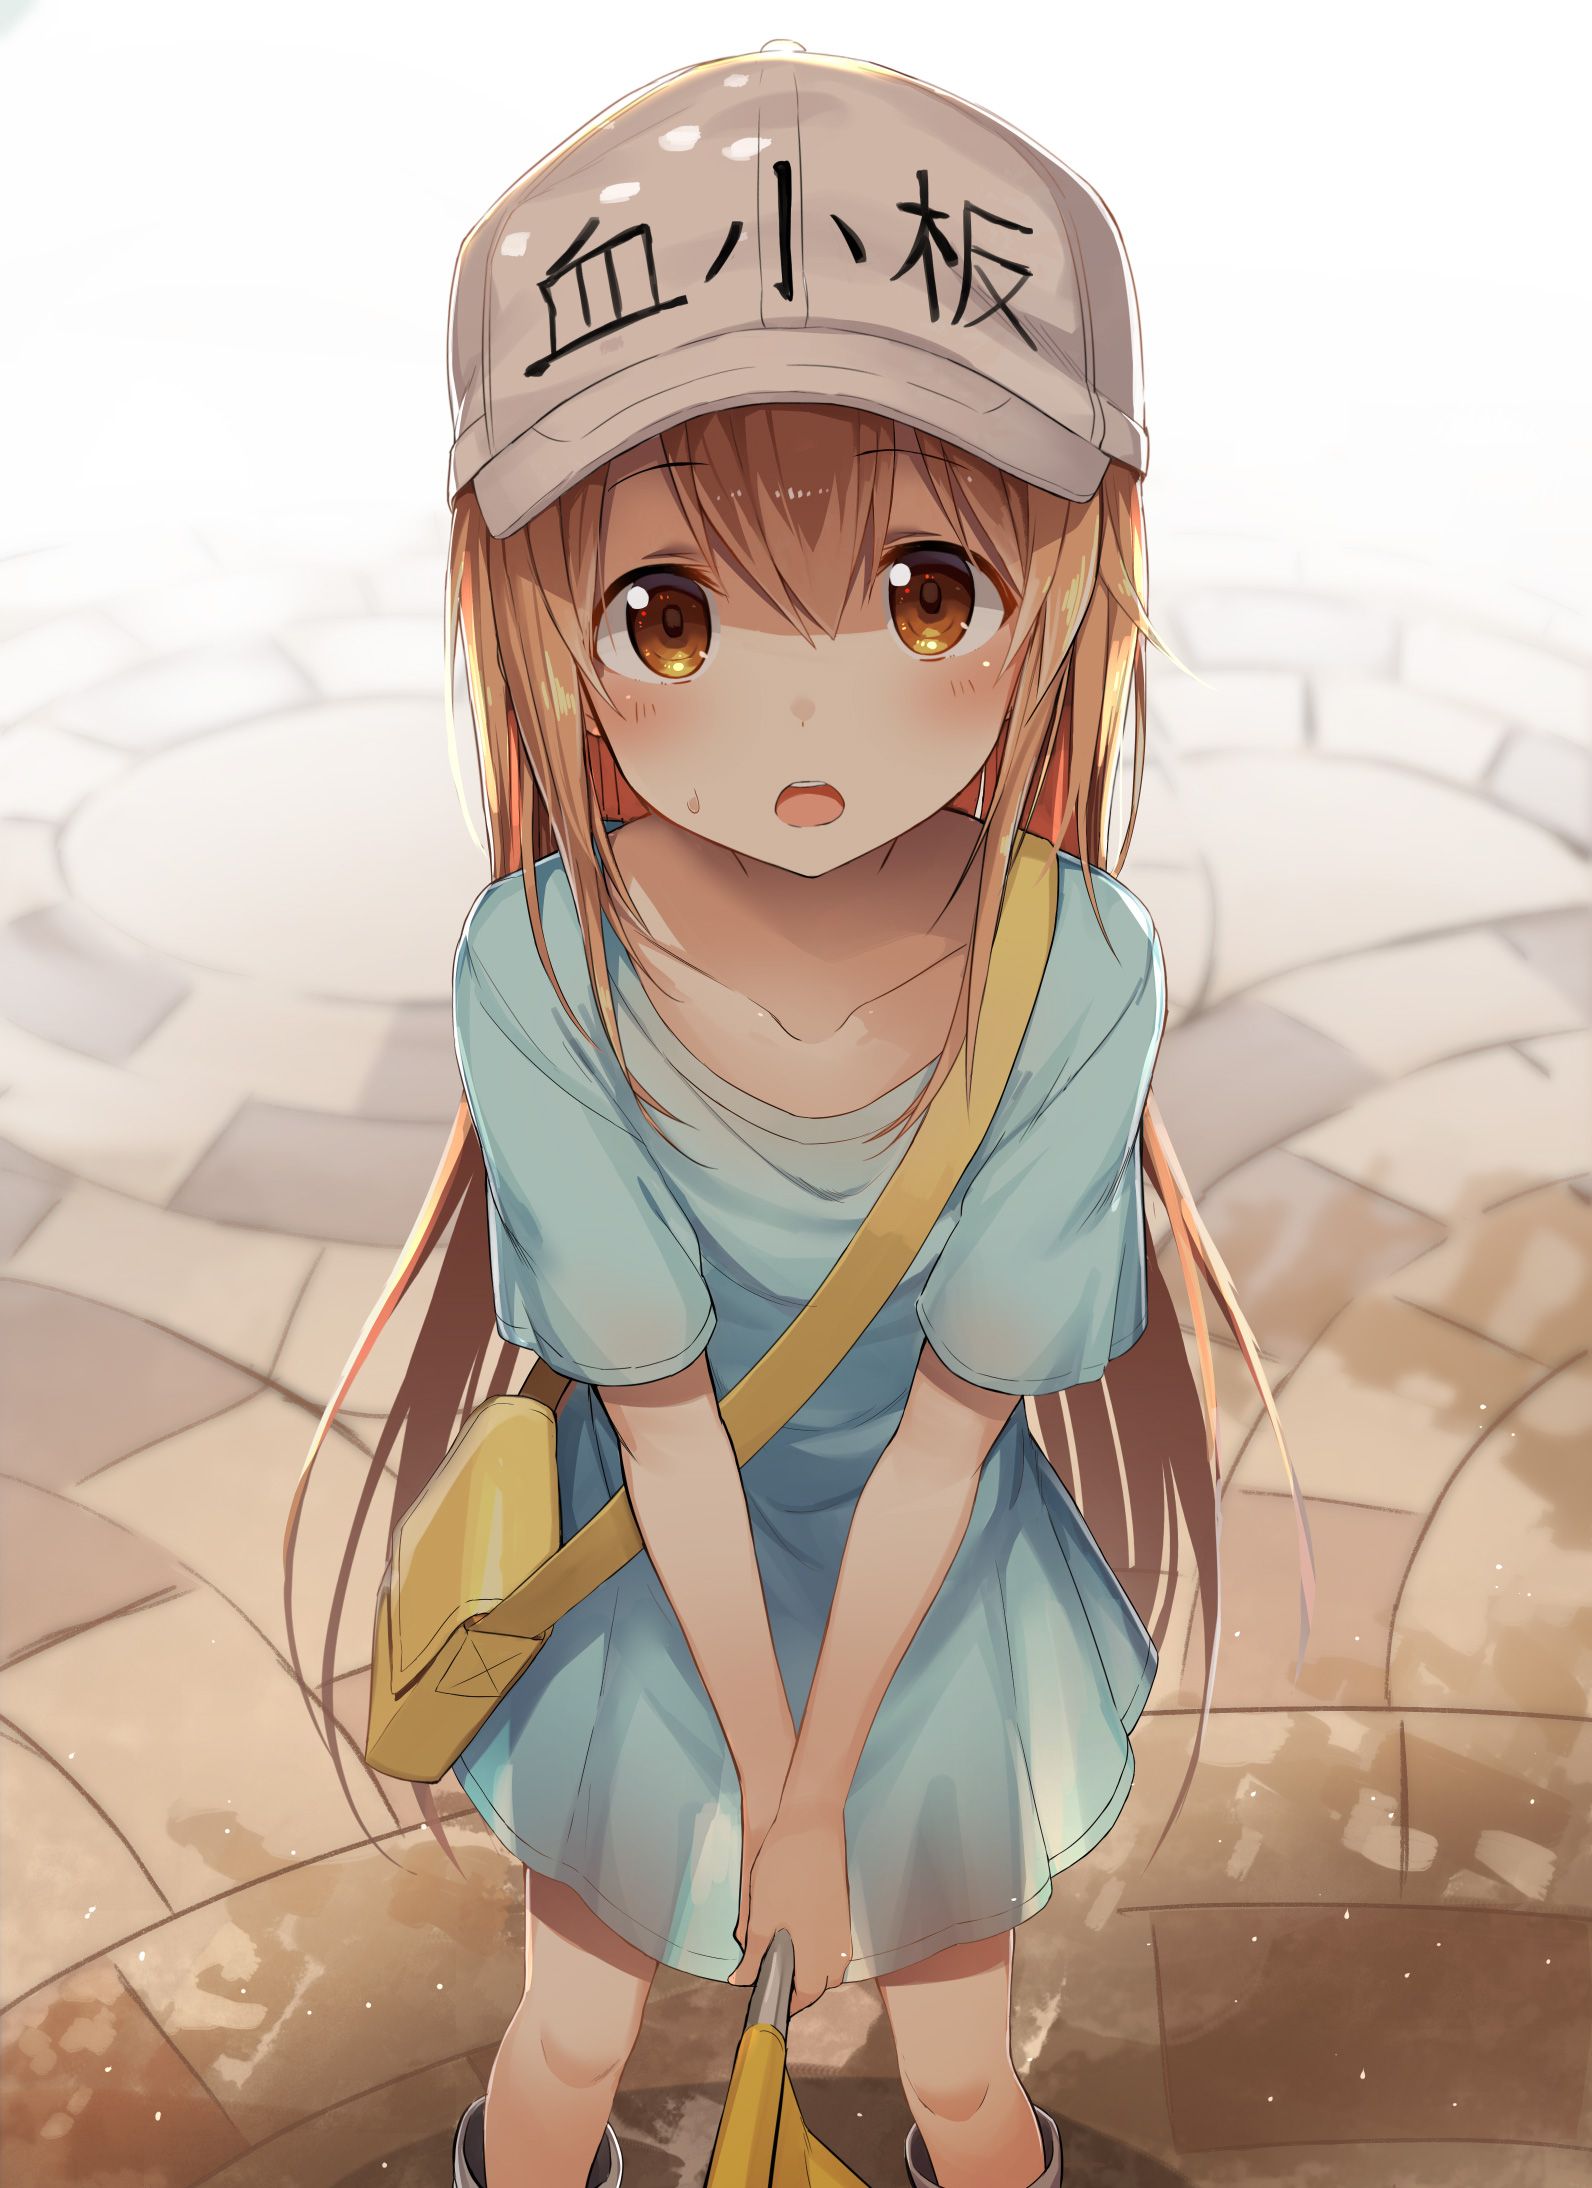 [Working cells] secondary images of platelets 1 60 sheets [ero/non-erotic] 32